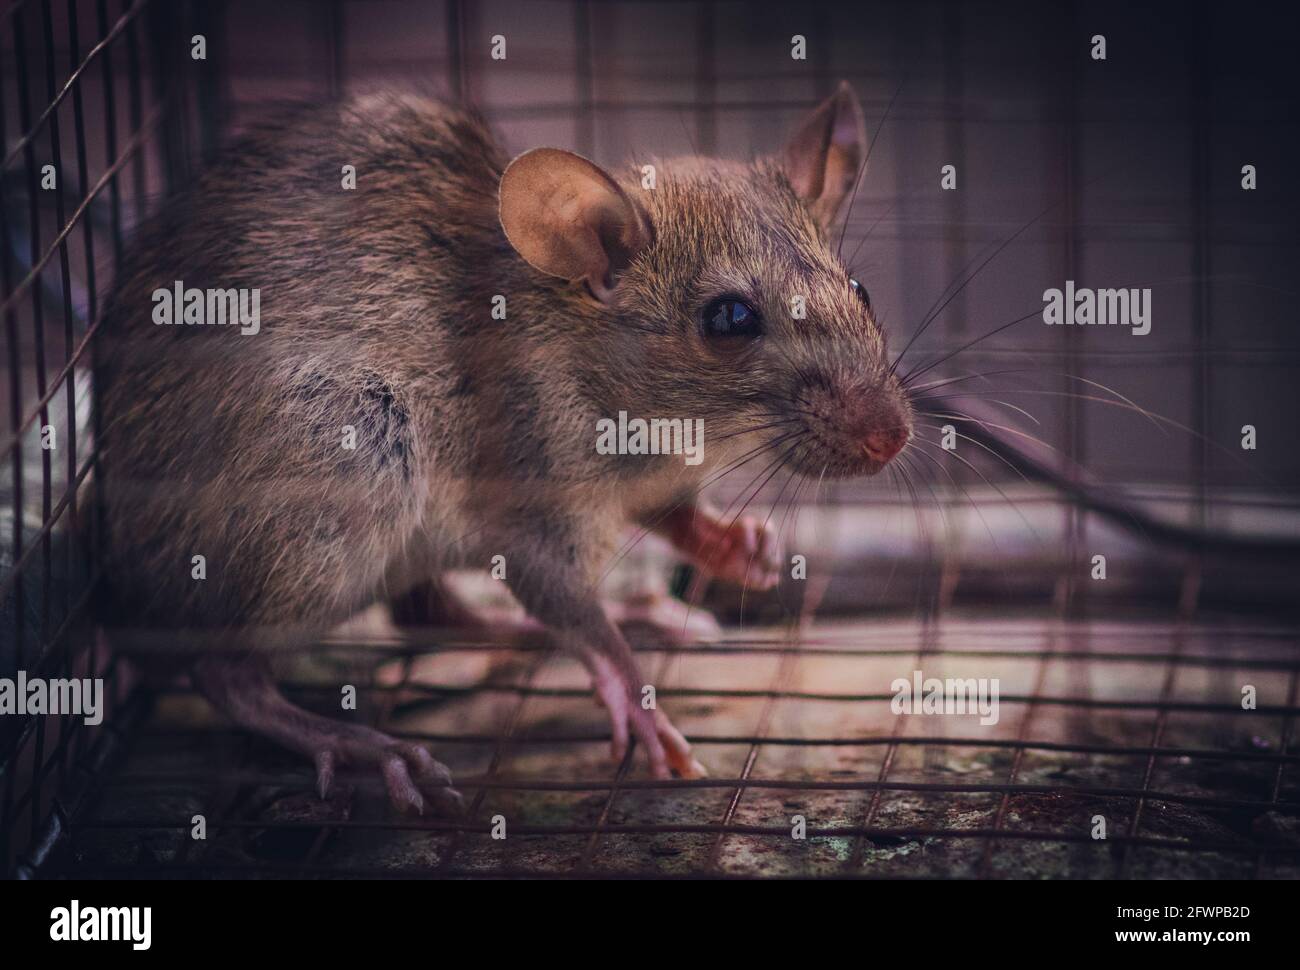 House rat trapped inside and cornered in a metal mesh mousetrap cage. concept of fear and pest control. Stock Photo